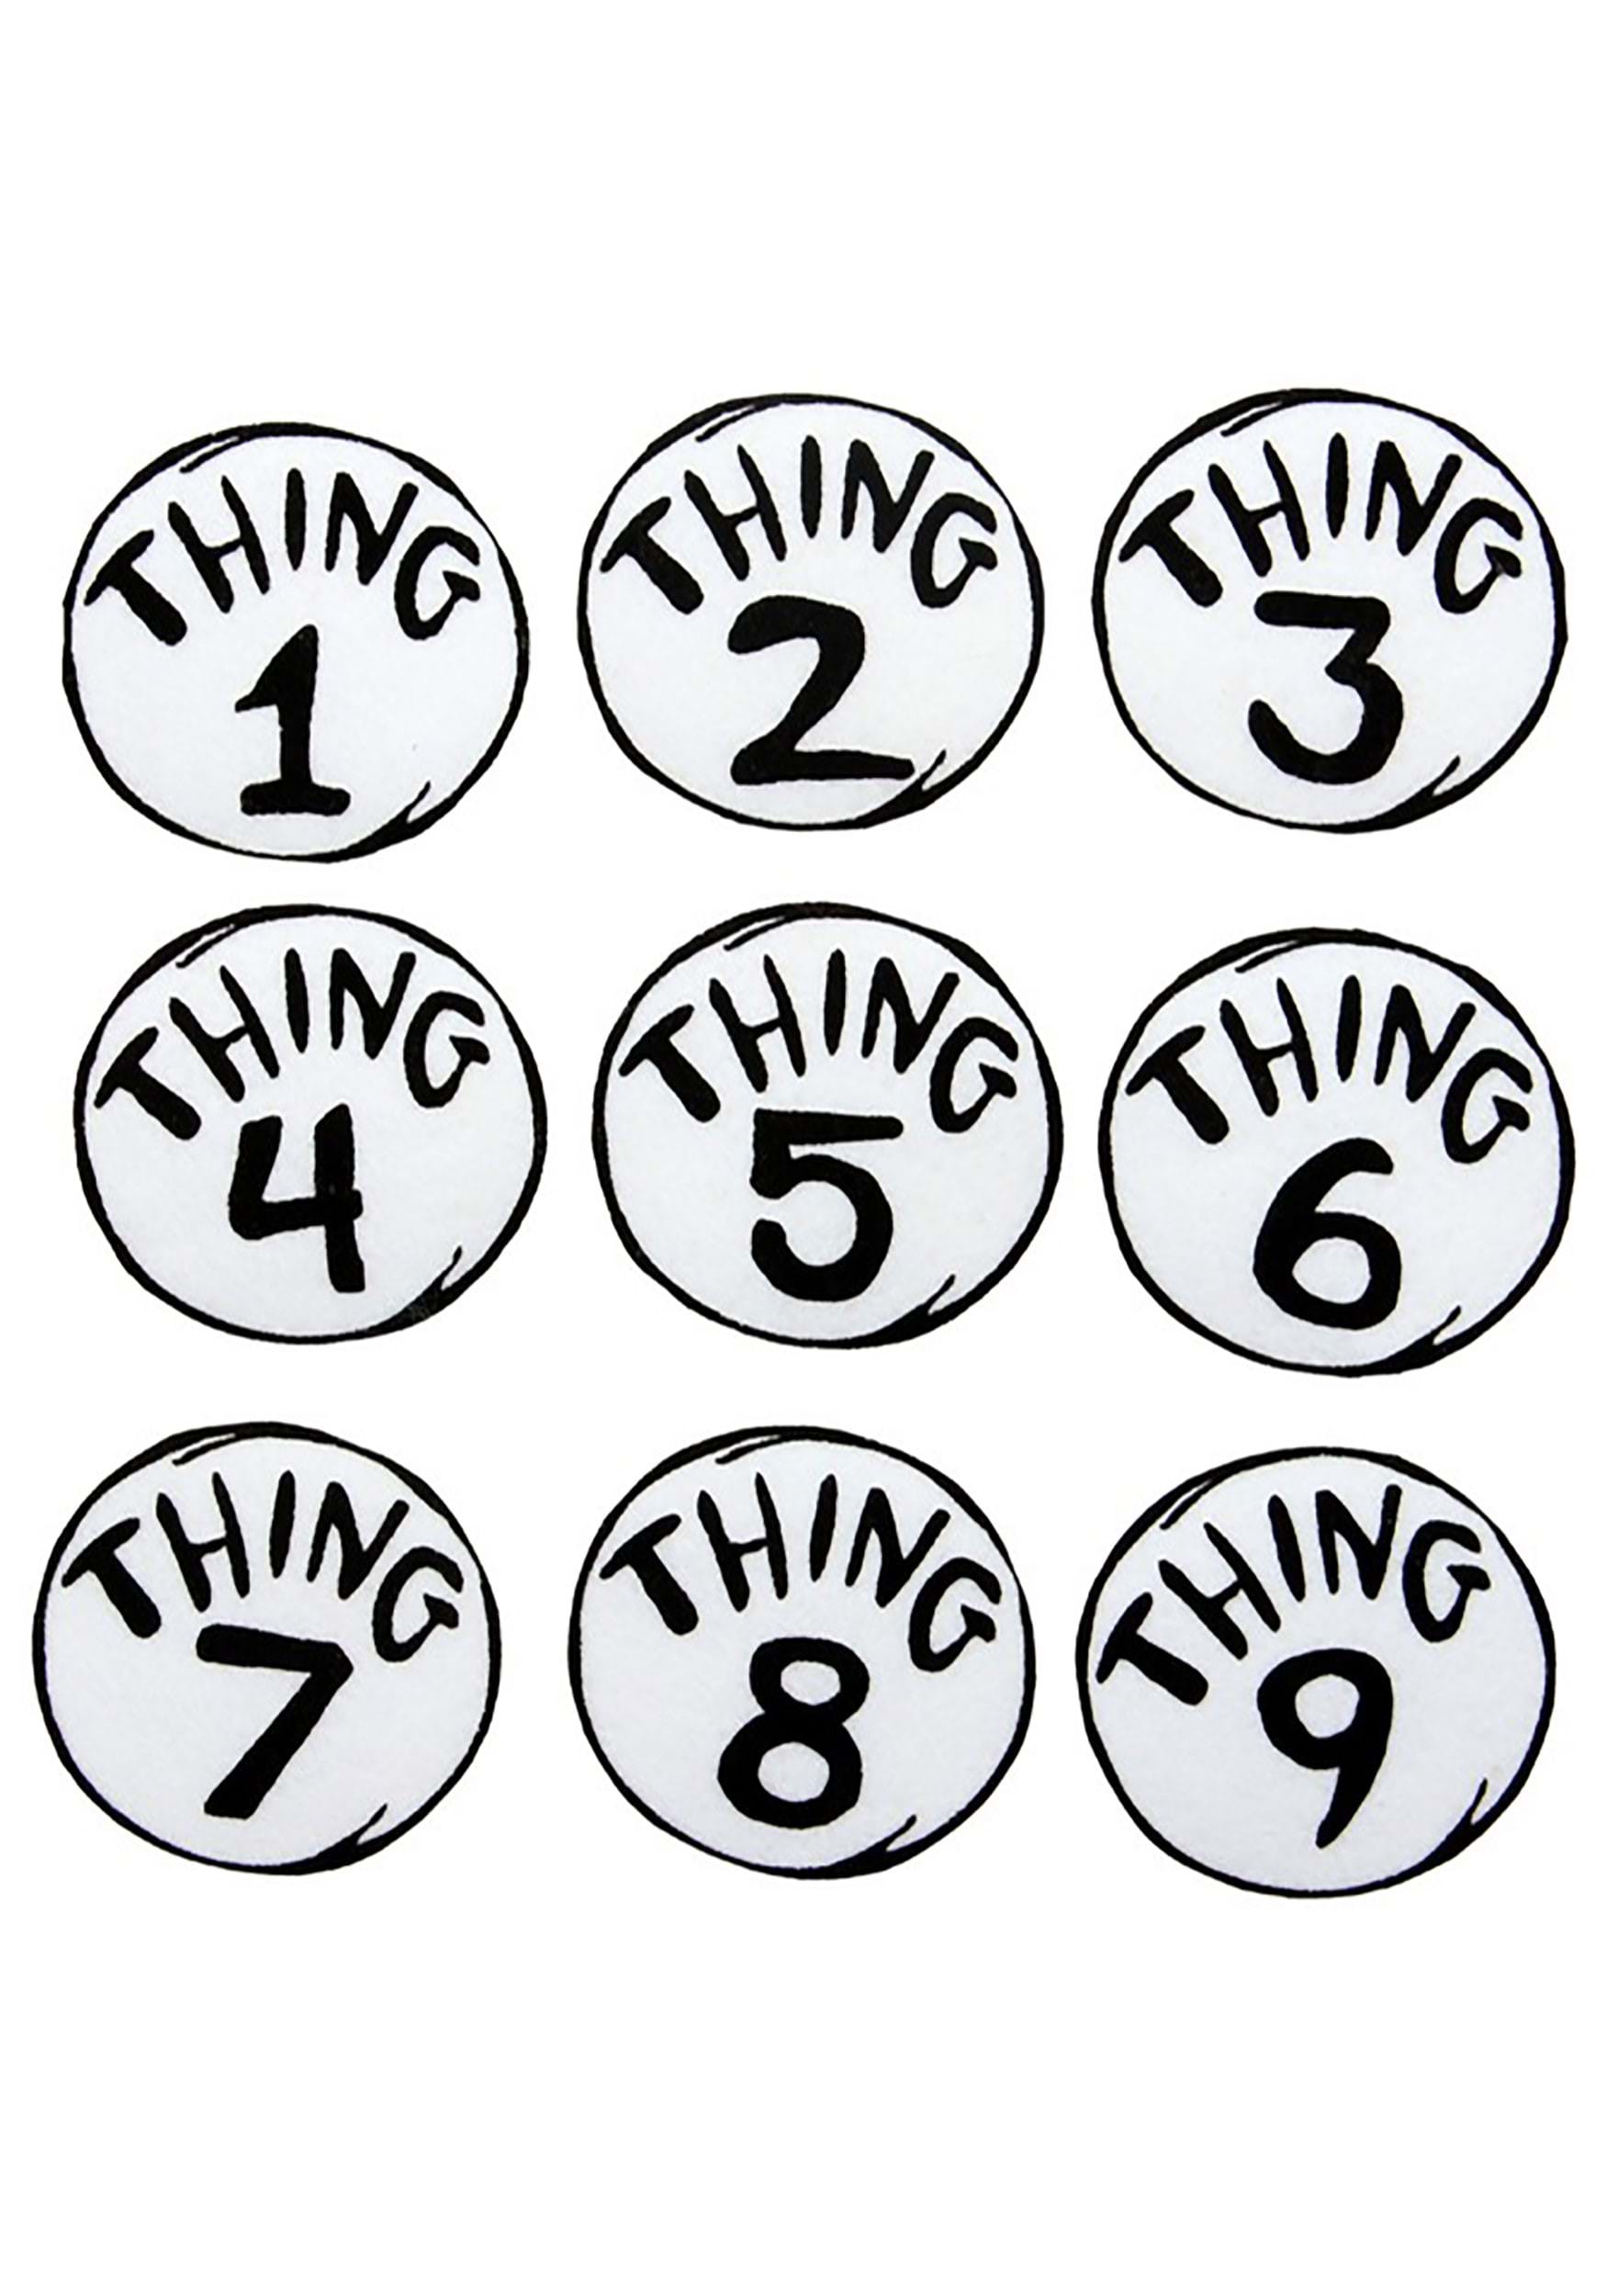 Set of Thing 1-9 Patches